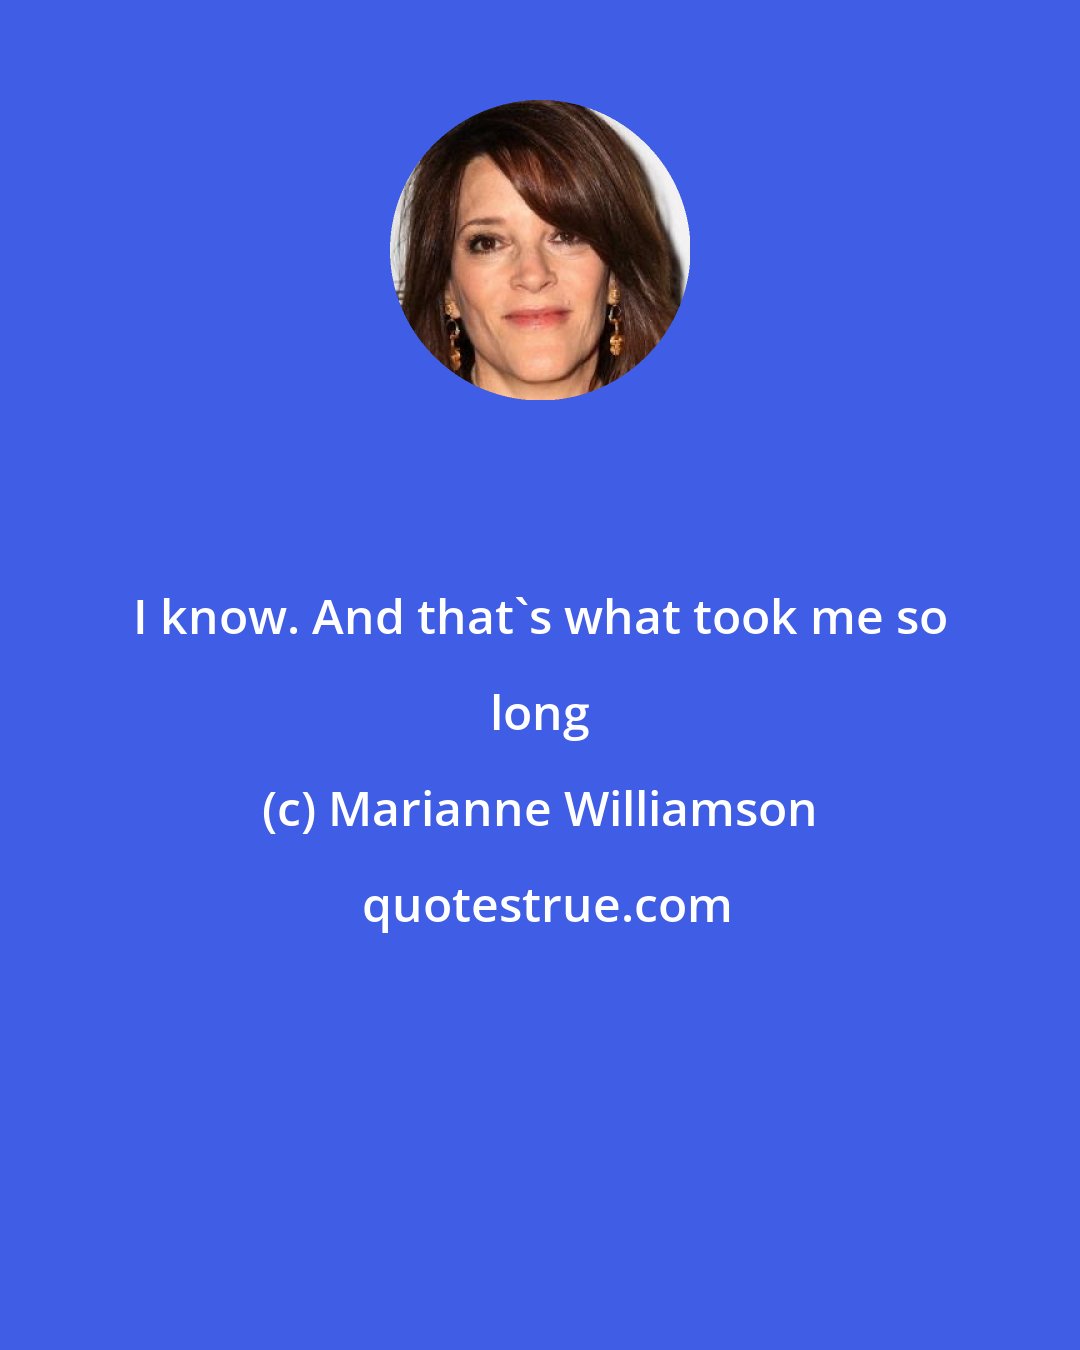 Marianne Williamson: I know. And that's what took me so long